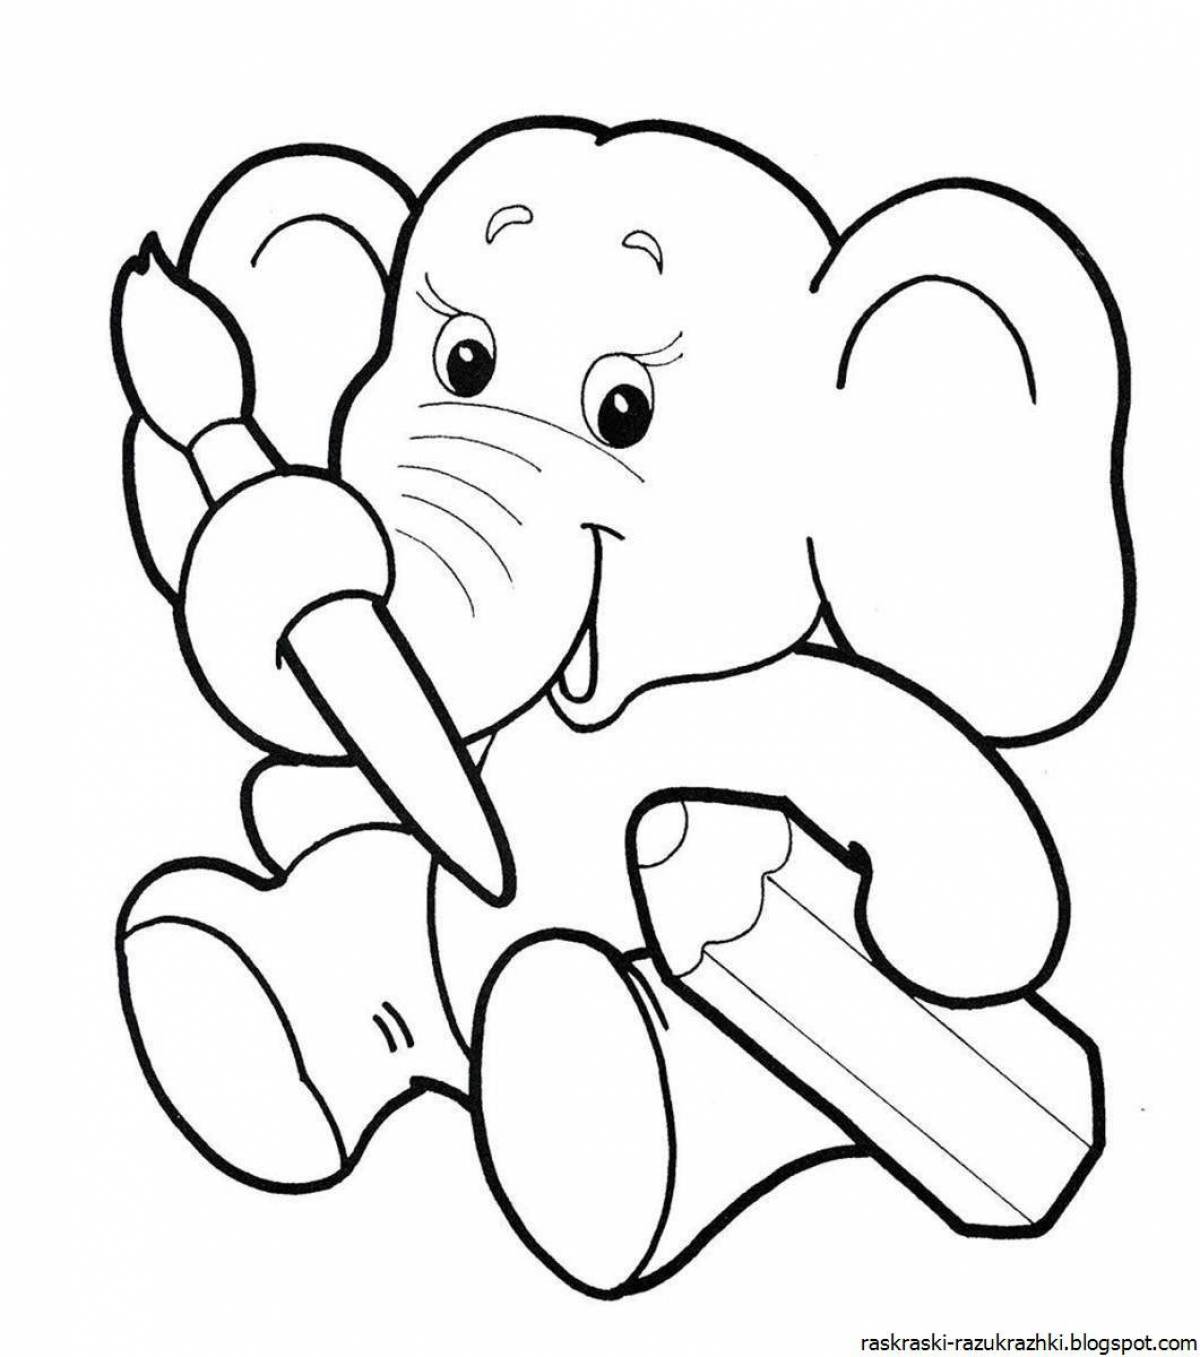 Animated elephant coloring page for kids